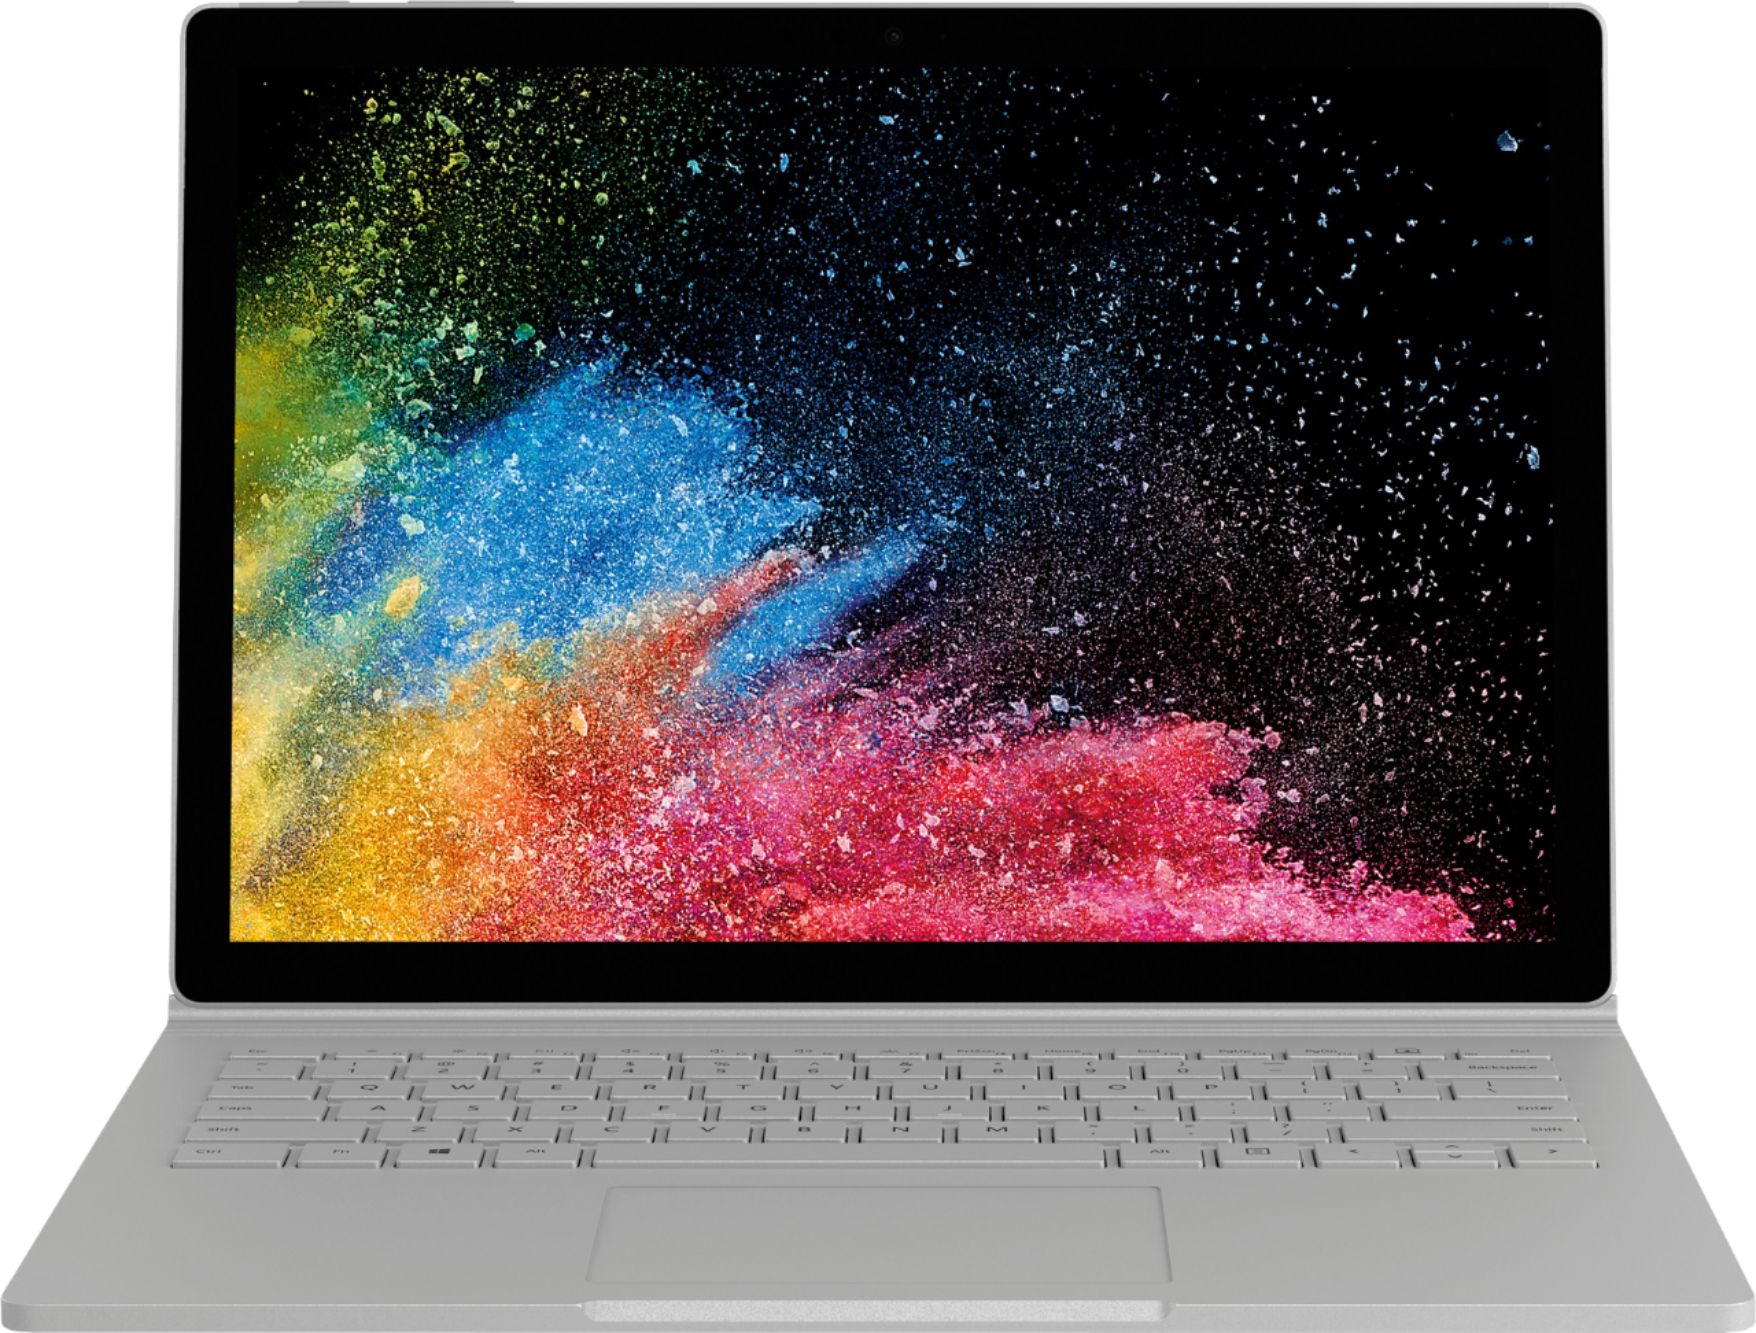 Angle View: Microsoft - Geek Squad Certified Refurbished Surface Book 2 - 13.5" Touch-Screen Laptop - Intel Core i5 - 8GB Memory - 256GB SSD